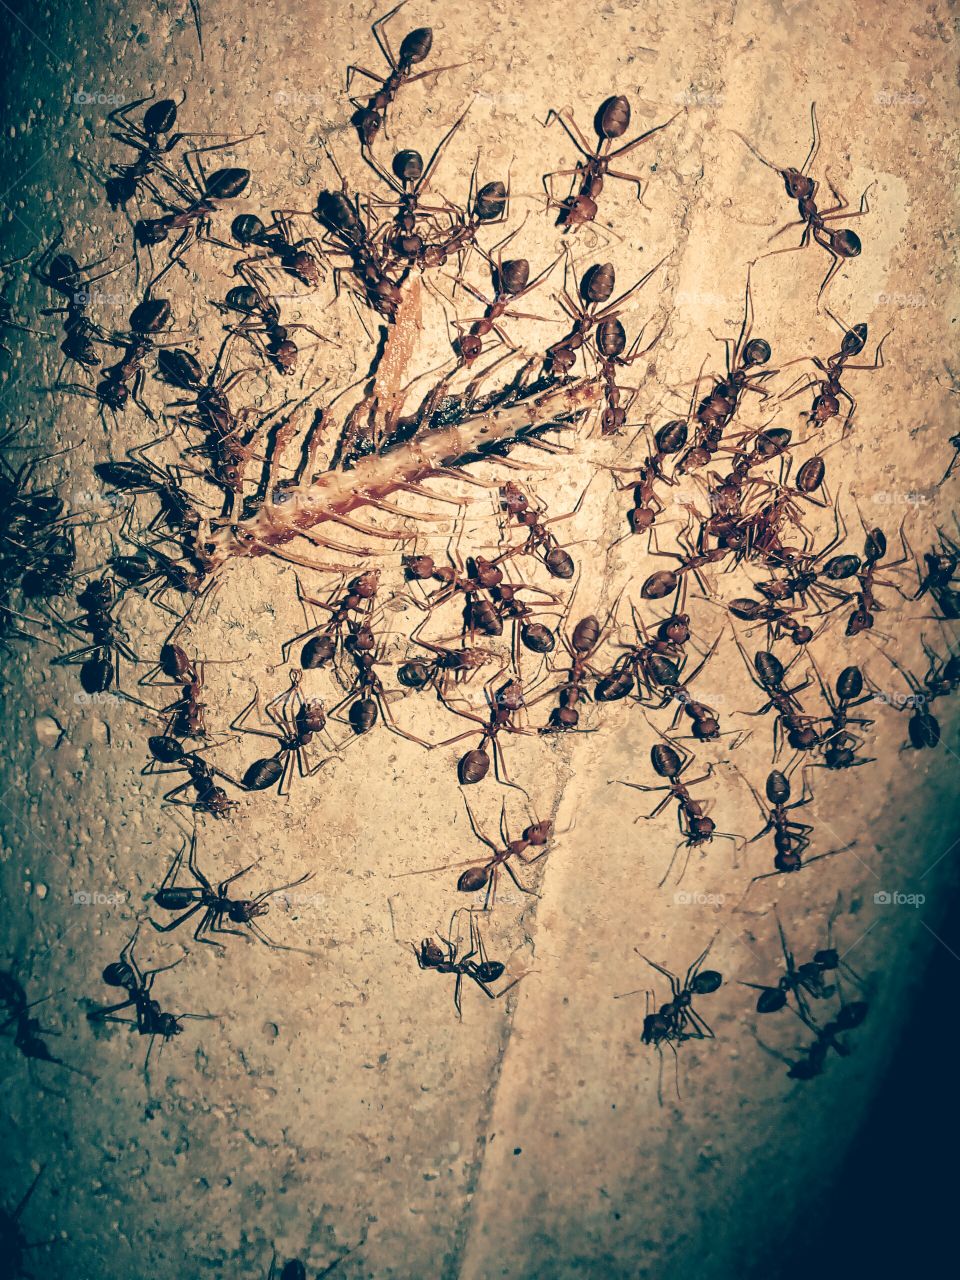 ants and food